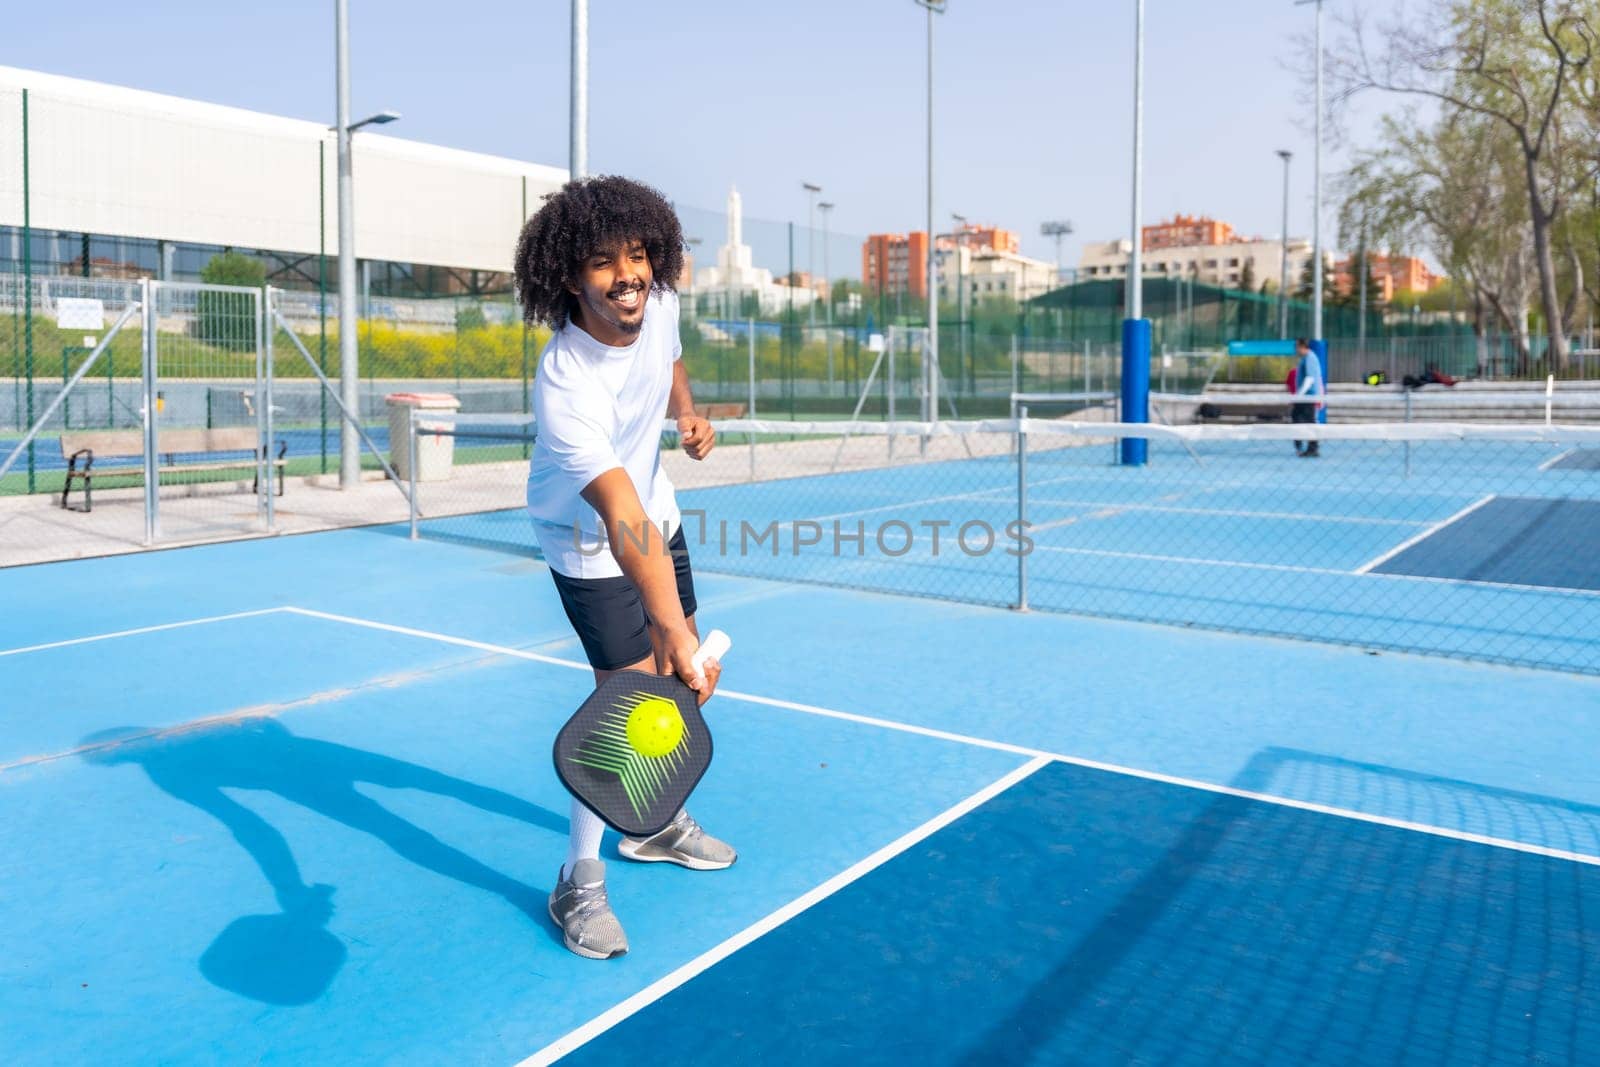 Man with afro hairstyle playing pickleball in an outdoor court by Huizi